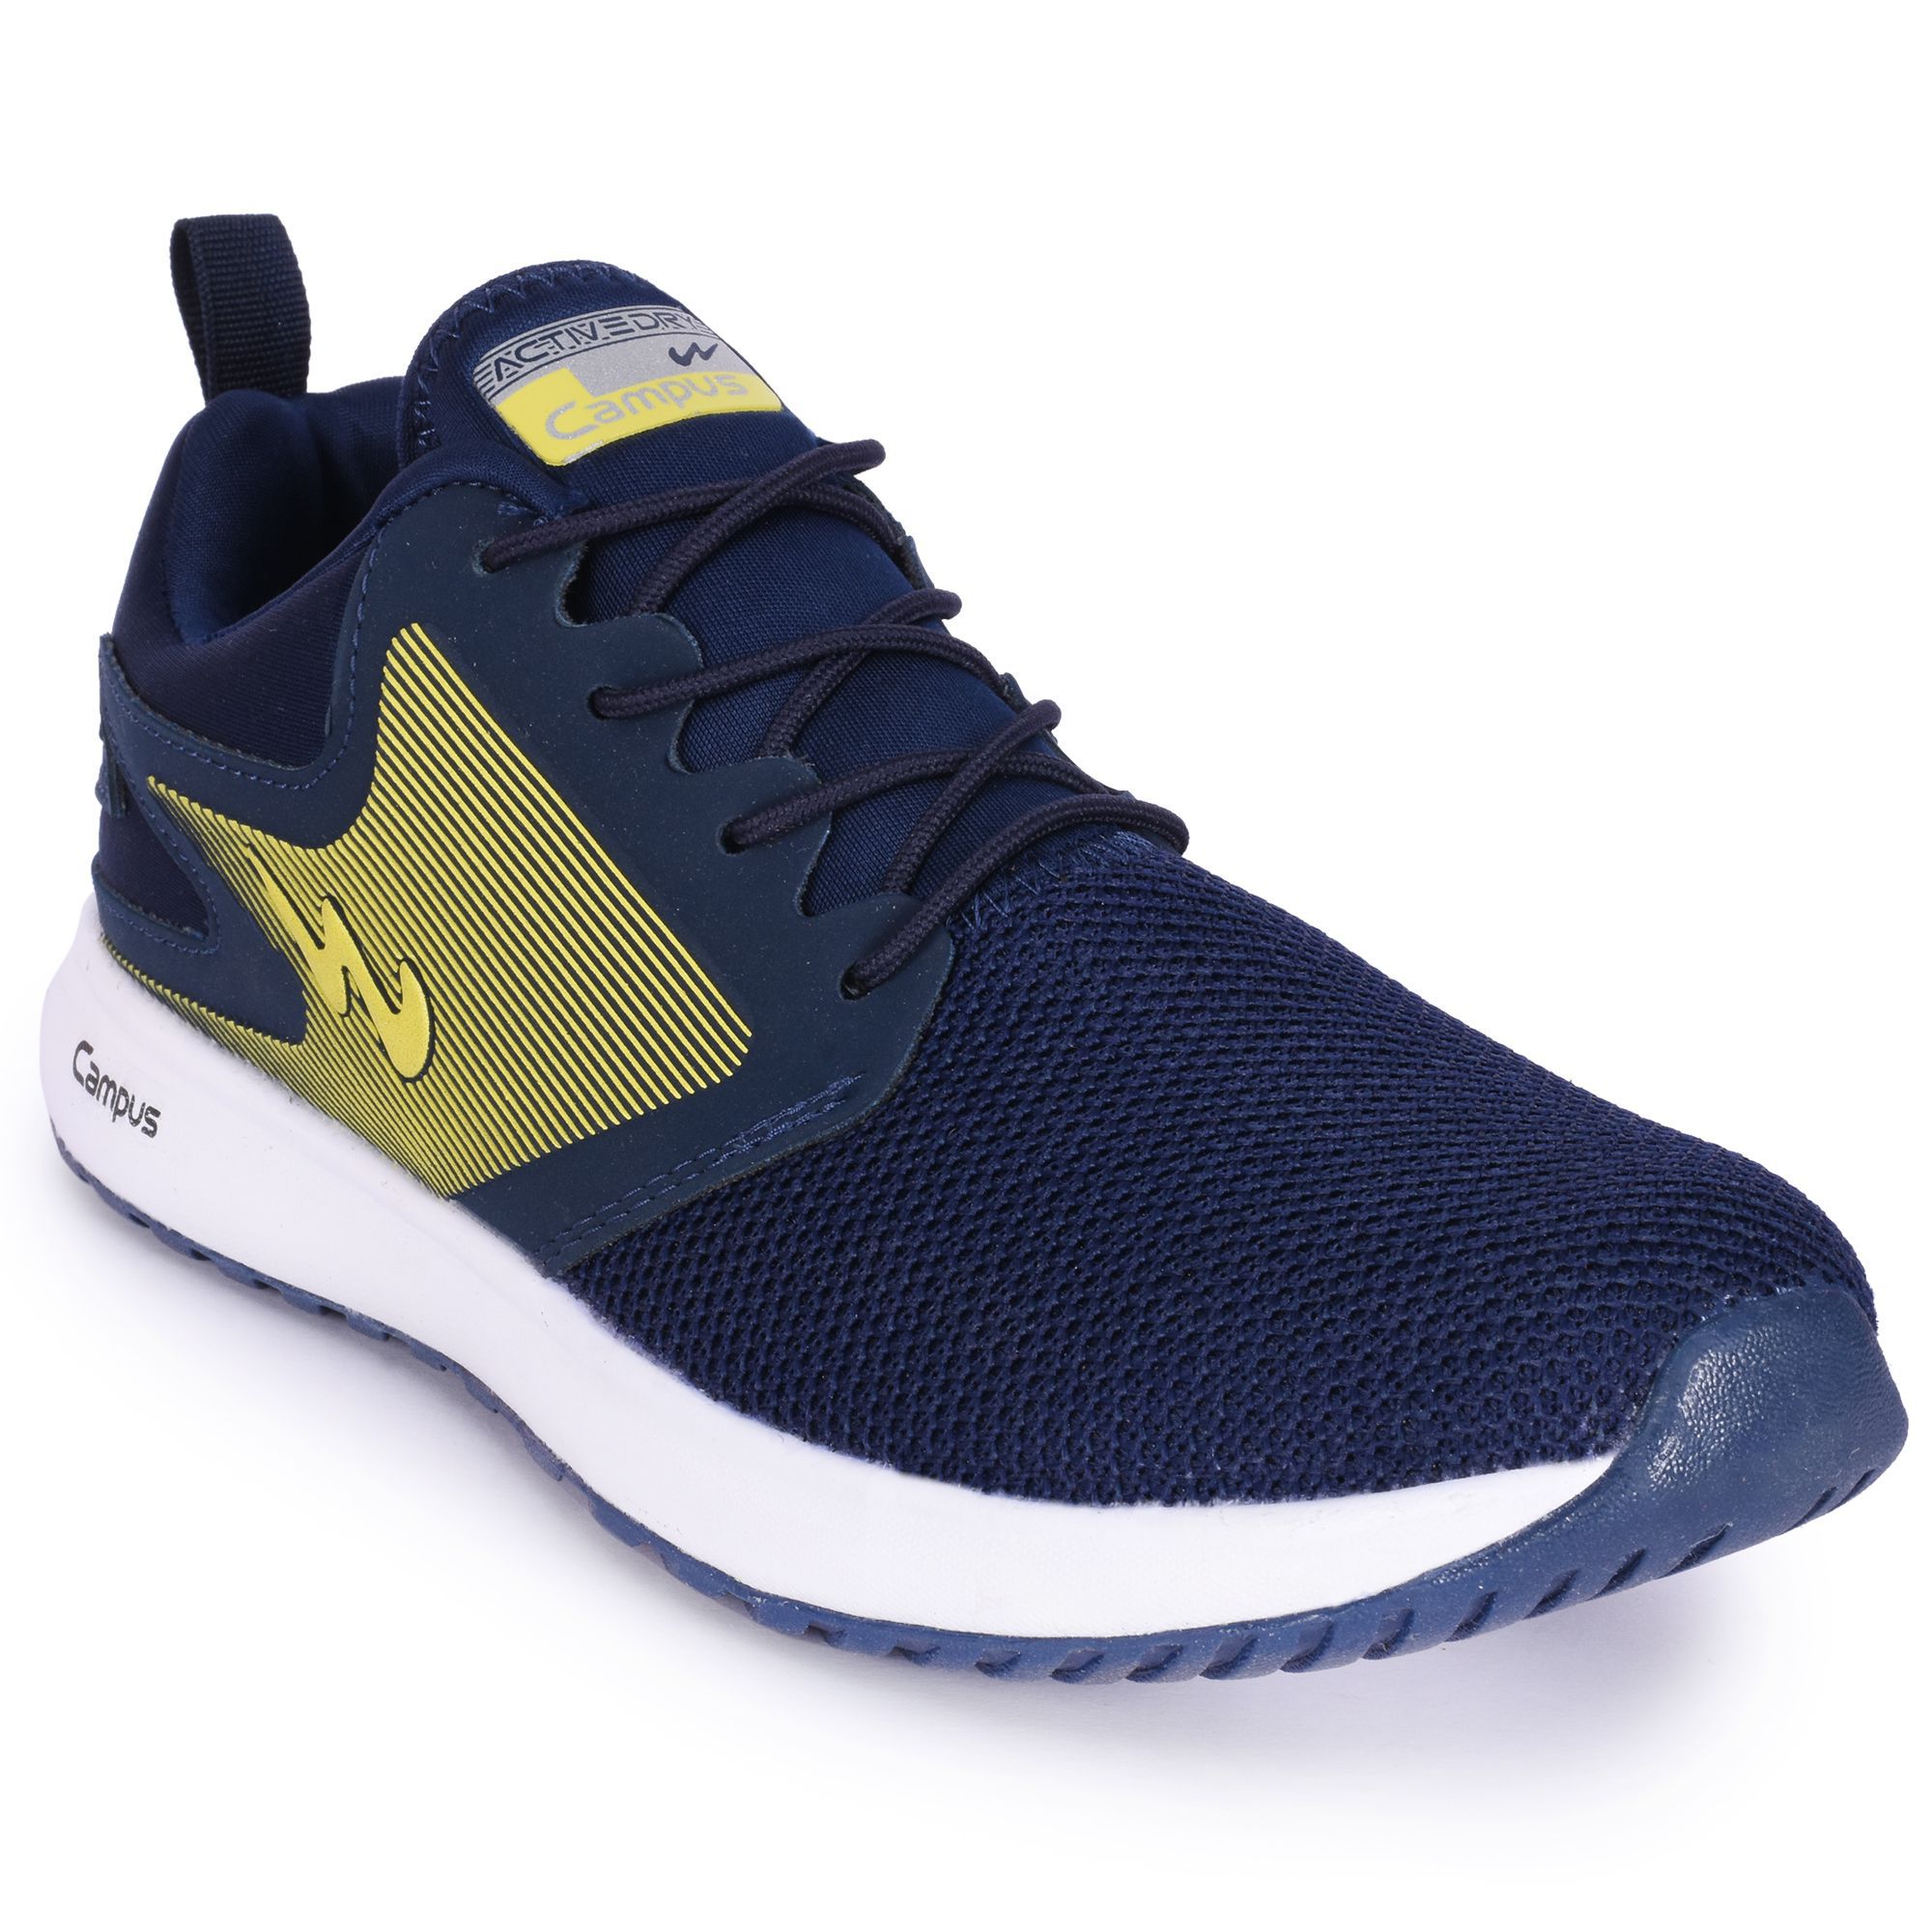 Campus Glory Navy Running Shoes - Buy Campus Glory Navy Running Shoes ...